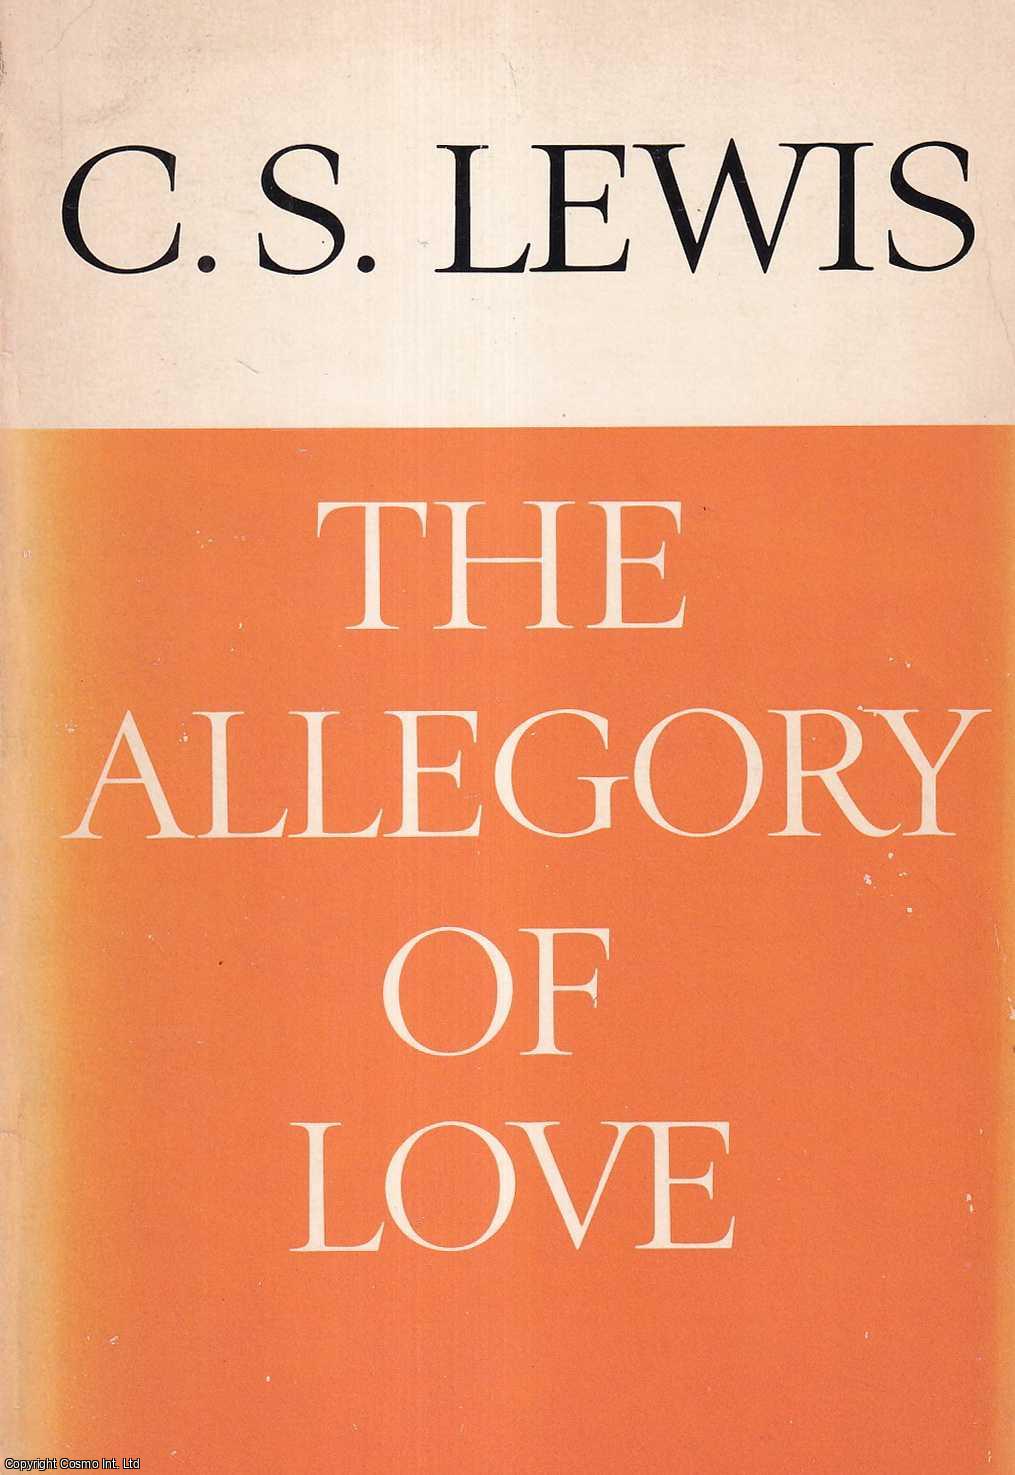 C.S. Lewis - The Allegory of Love.